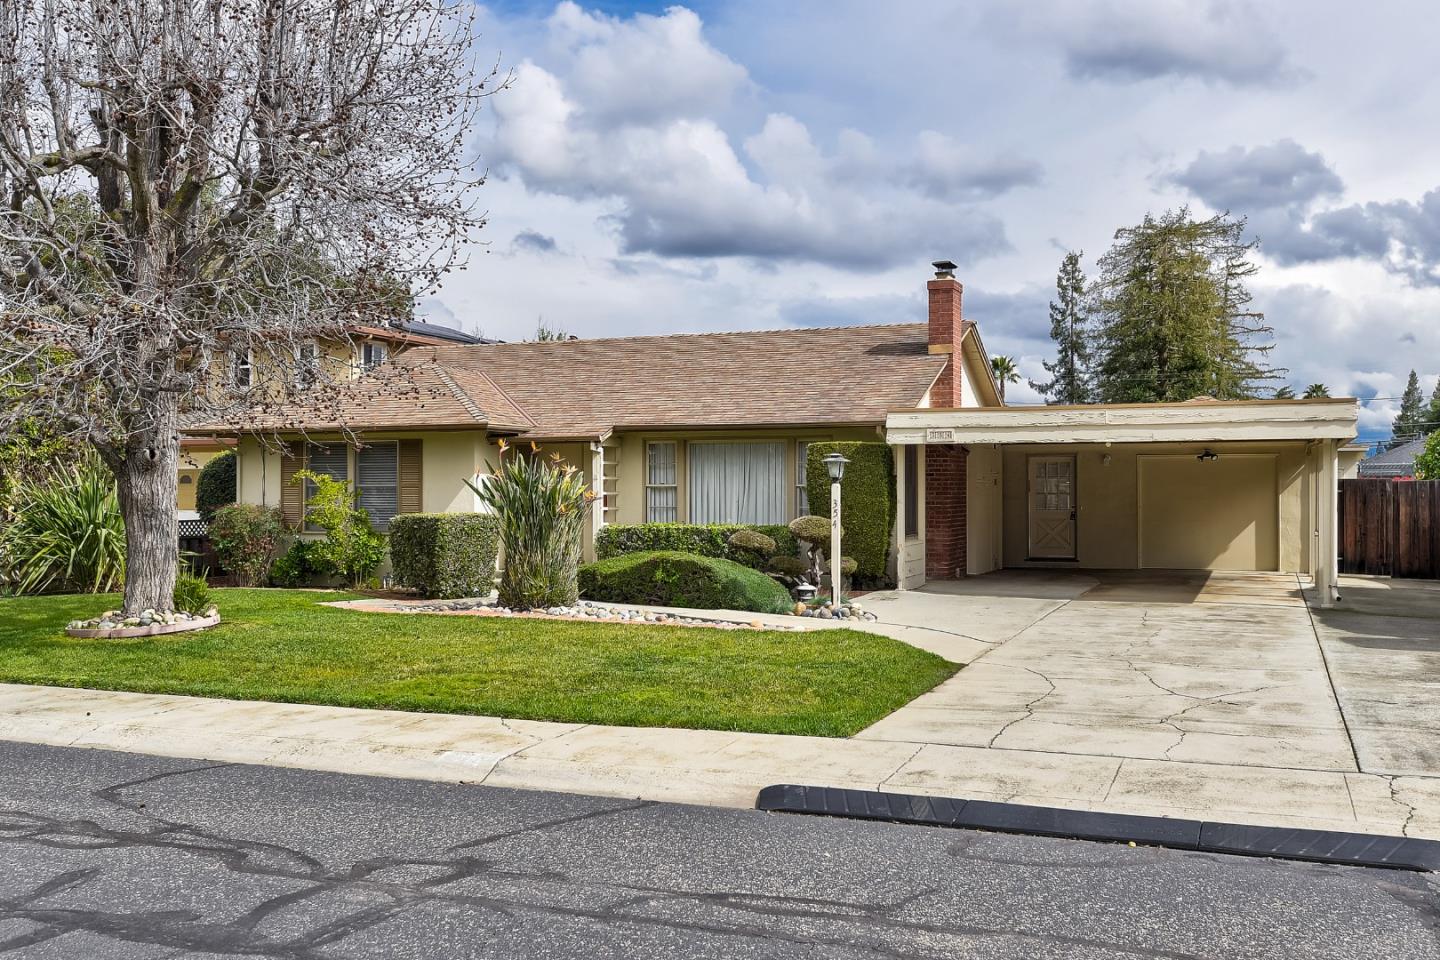 354 Carlyn Ave, Campbell, CA 95008